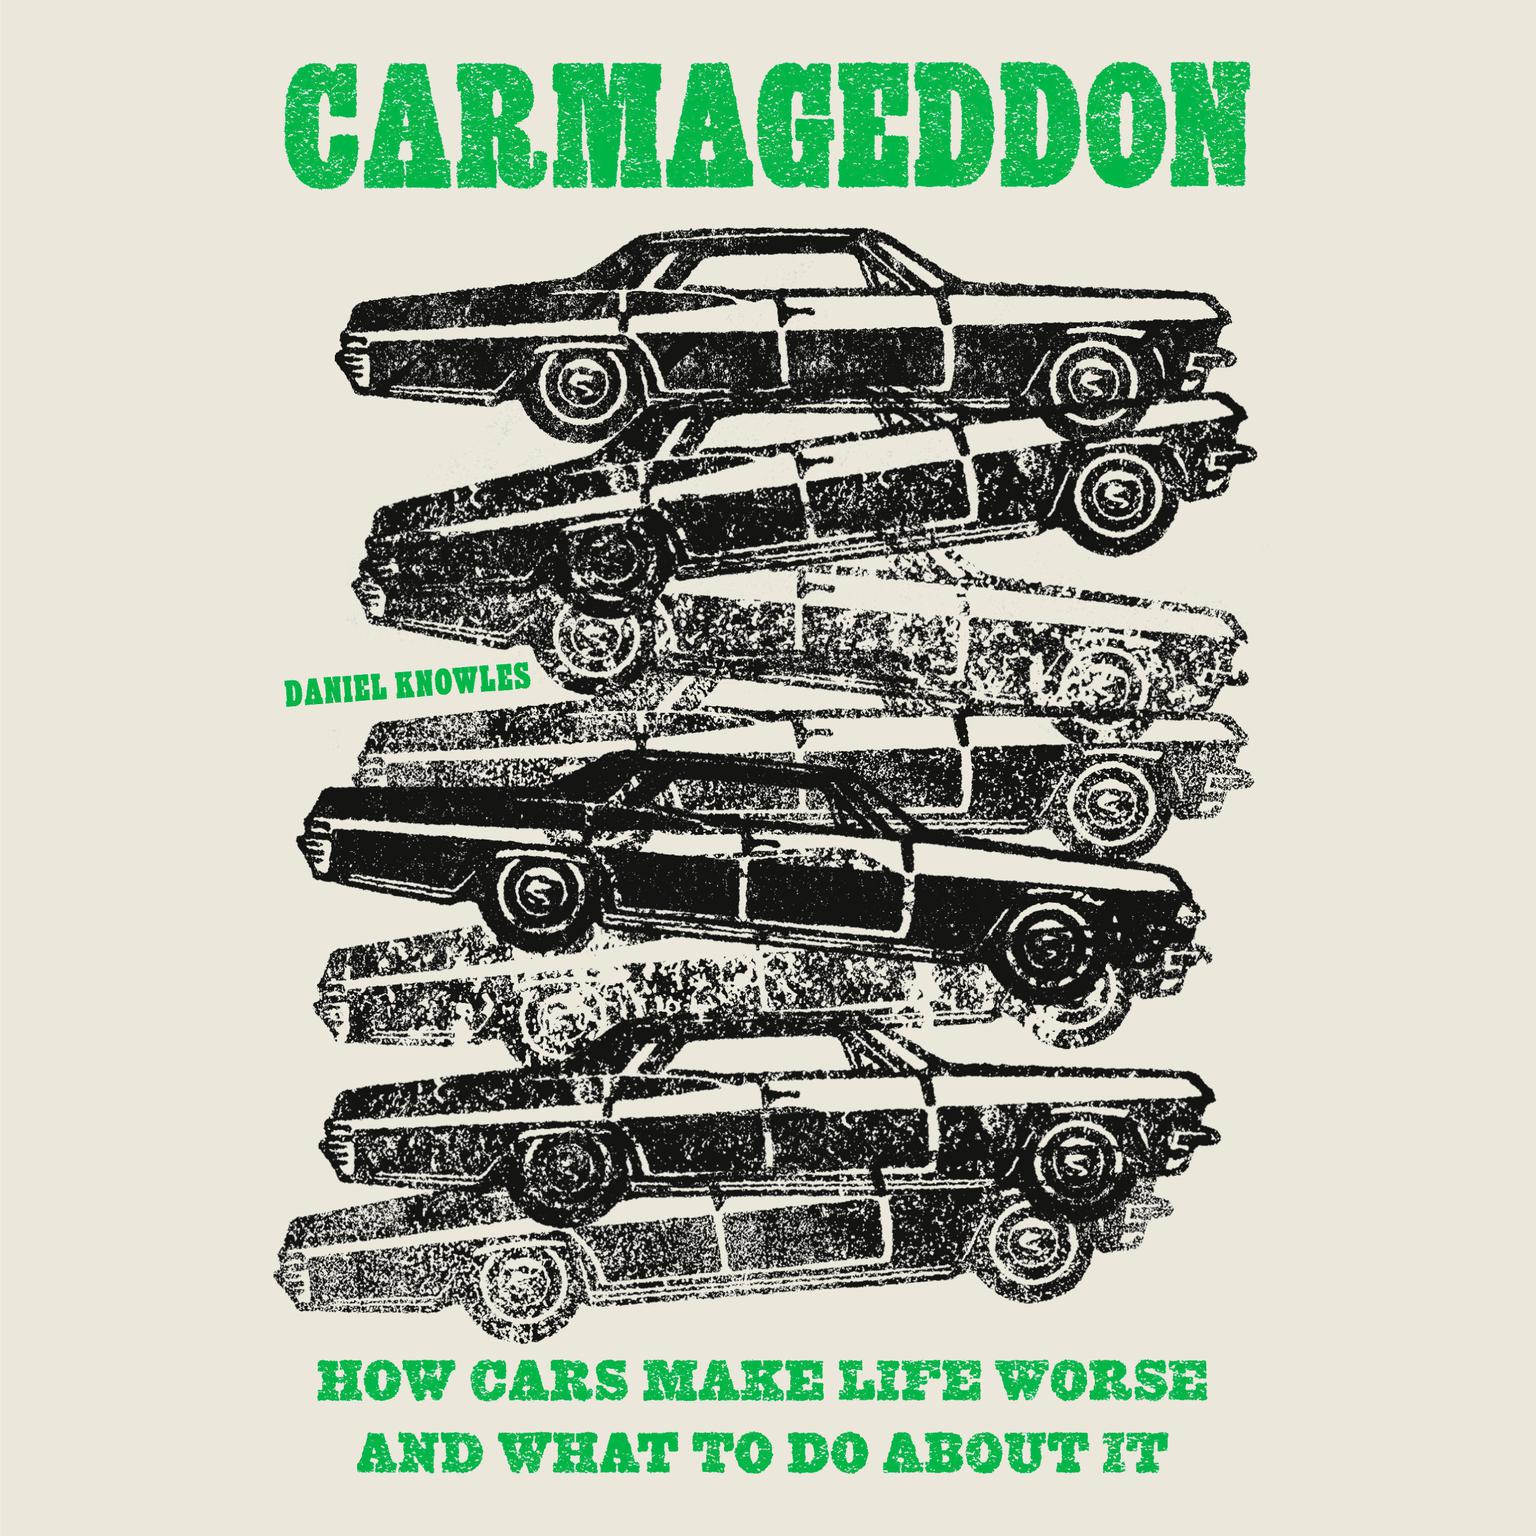 Carmageddon: How Cars Make Life Worse and What to Do About It Audiobook, by Daniel Knowles